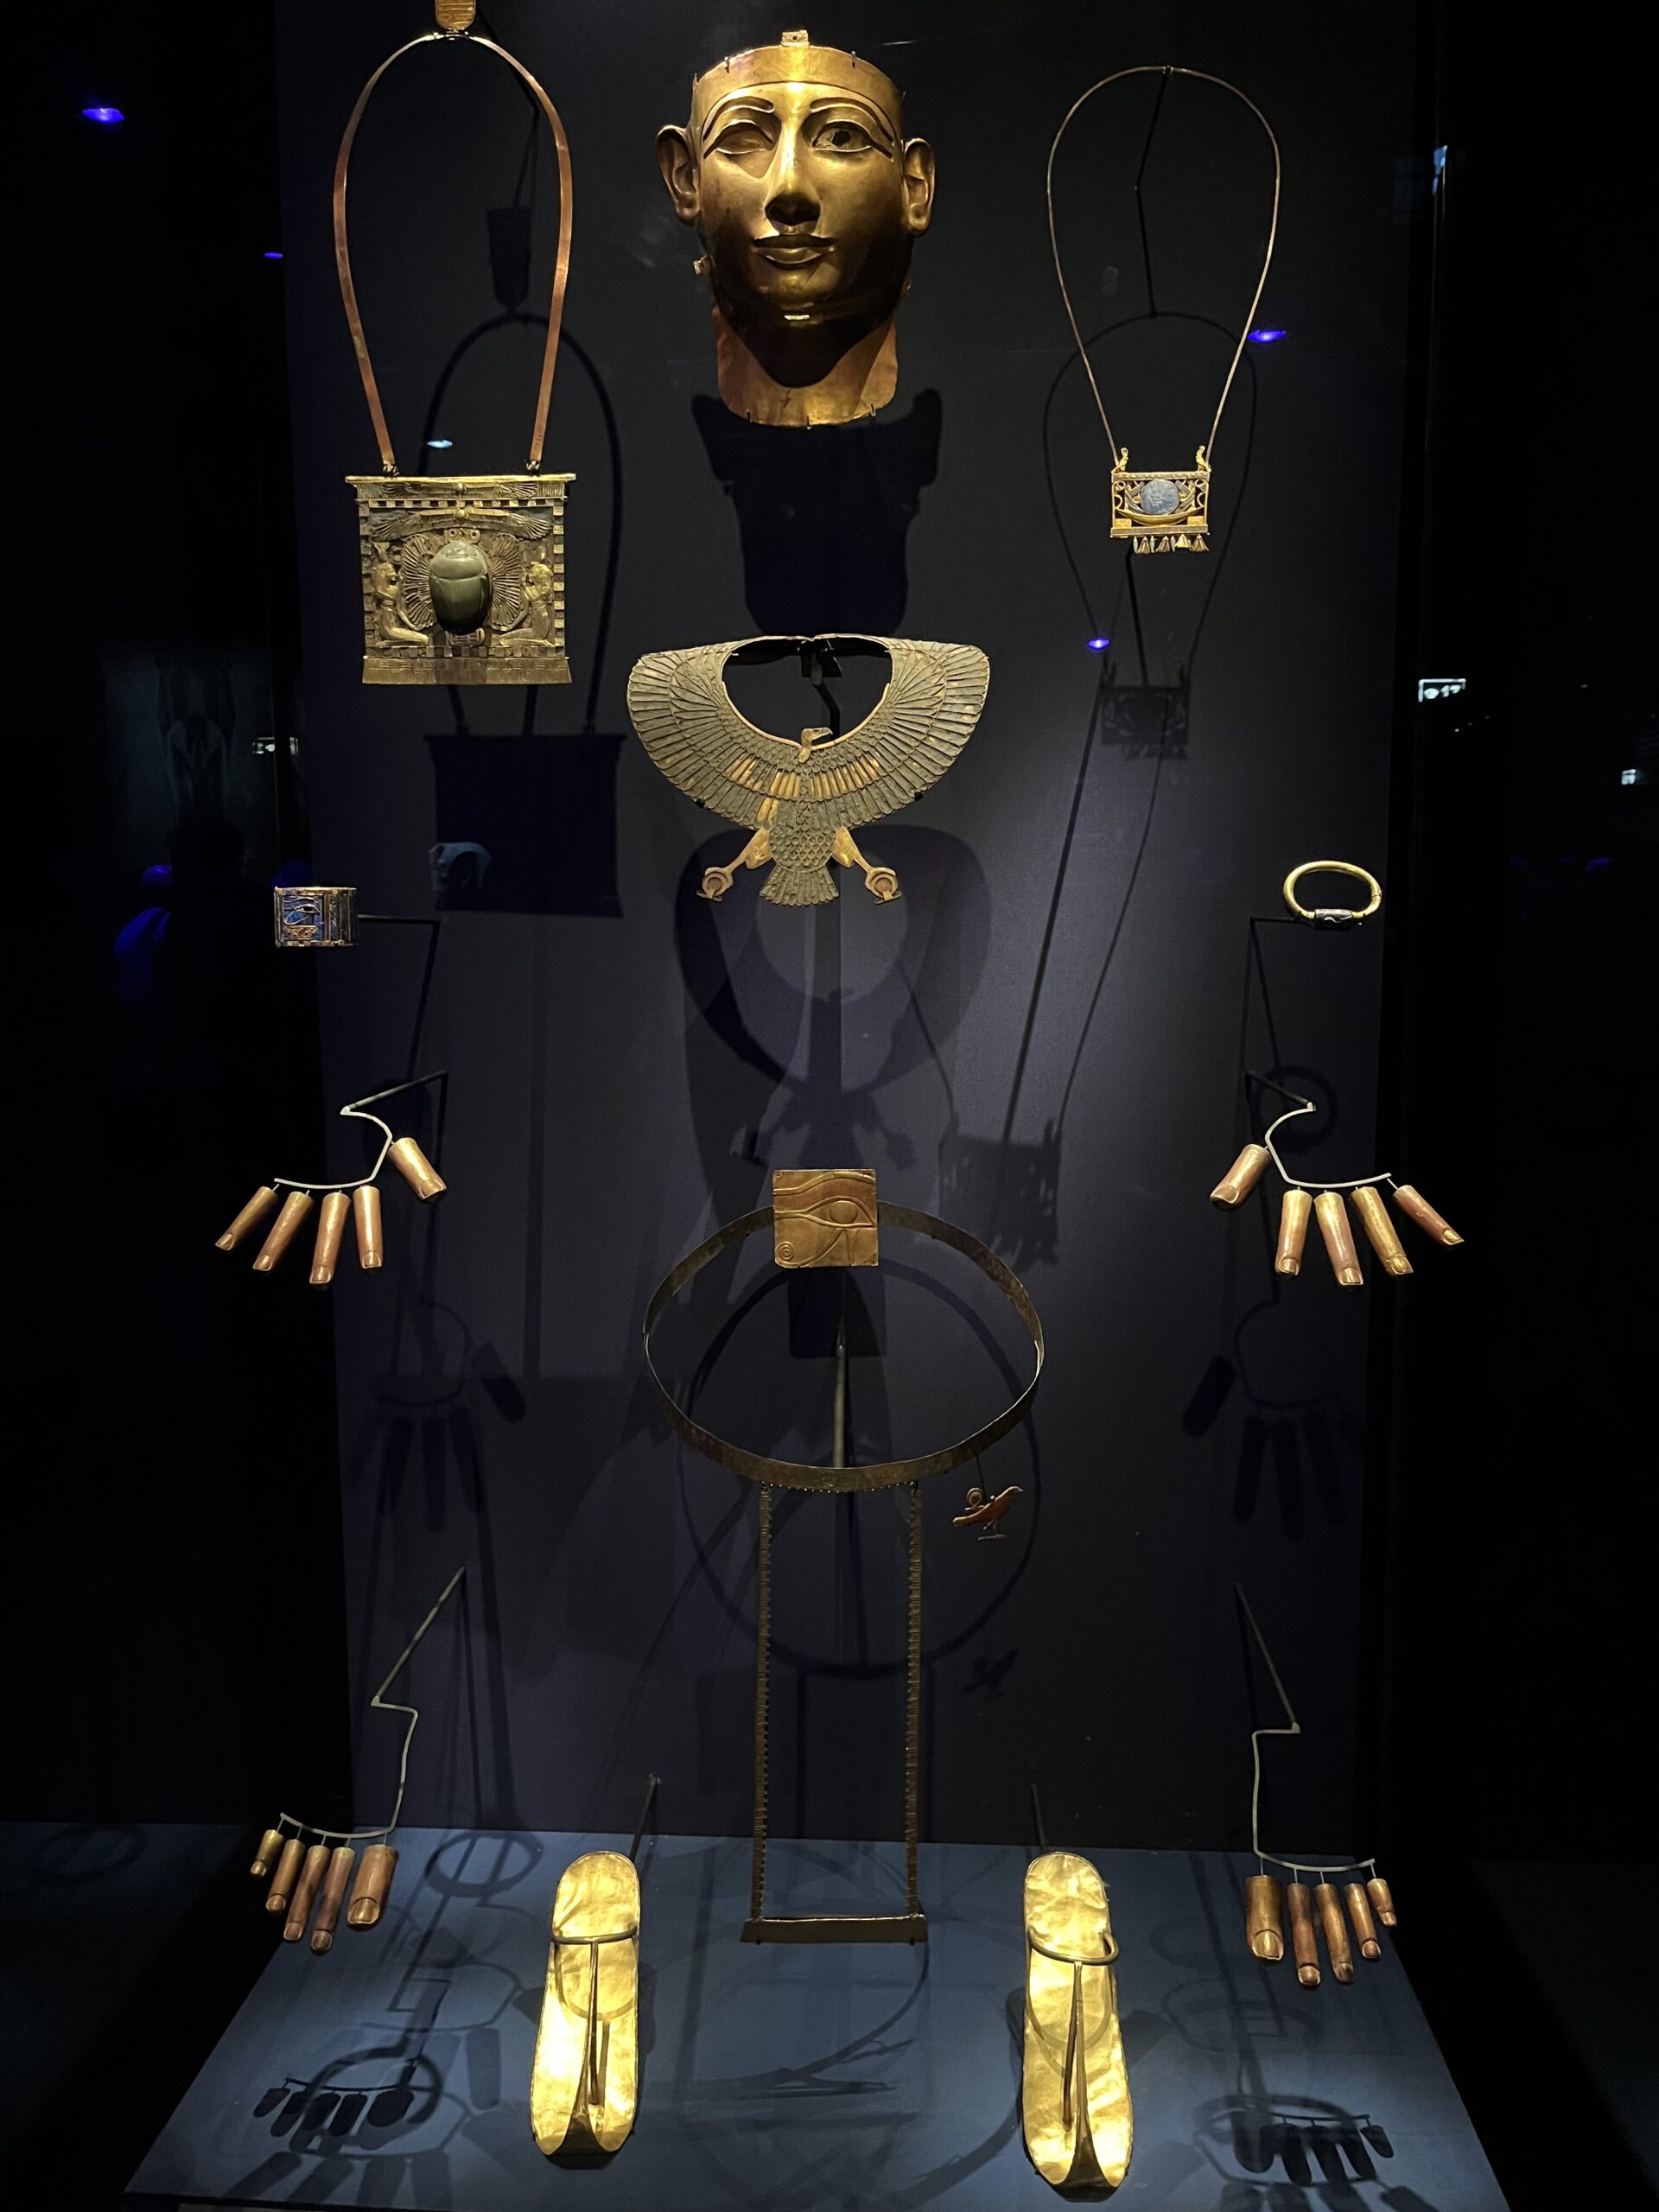 Treasures of Tanis - gold and silver treasures of 21st dynasty Pharaohs